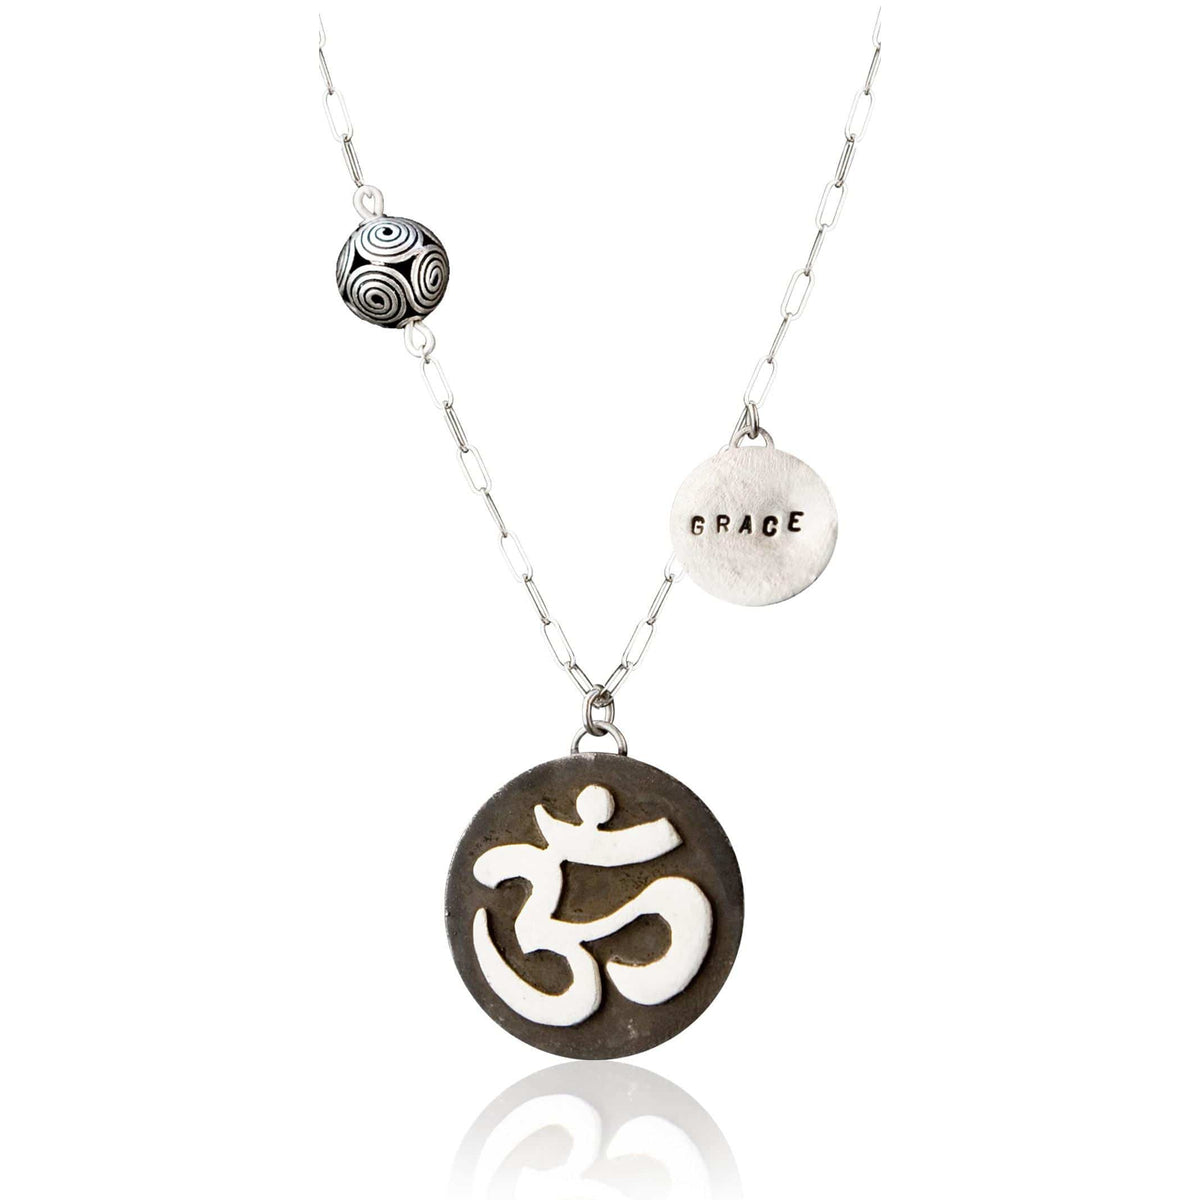 Sterling Silver Yoga and Meditation Necklace with Ohm and Grace Charms